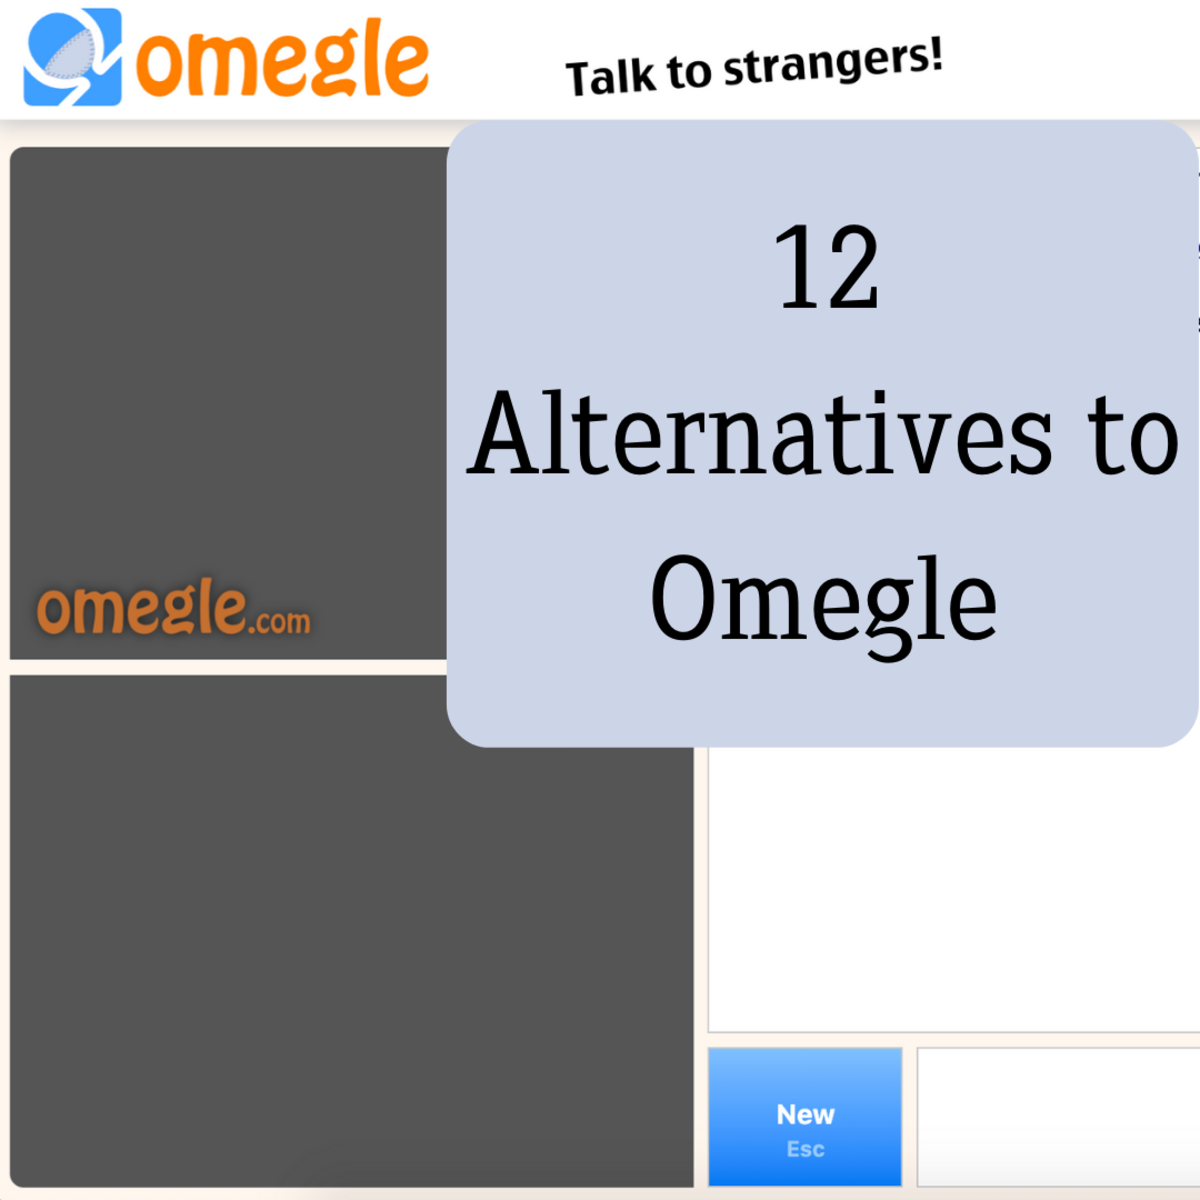 Top 12 Apps Like Omegle Everyone Should Check Out - TurboFuture